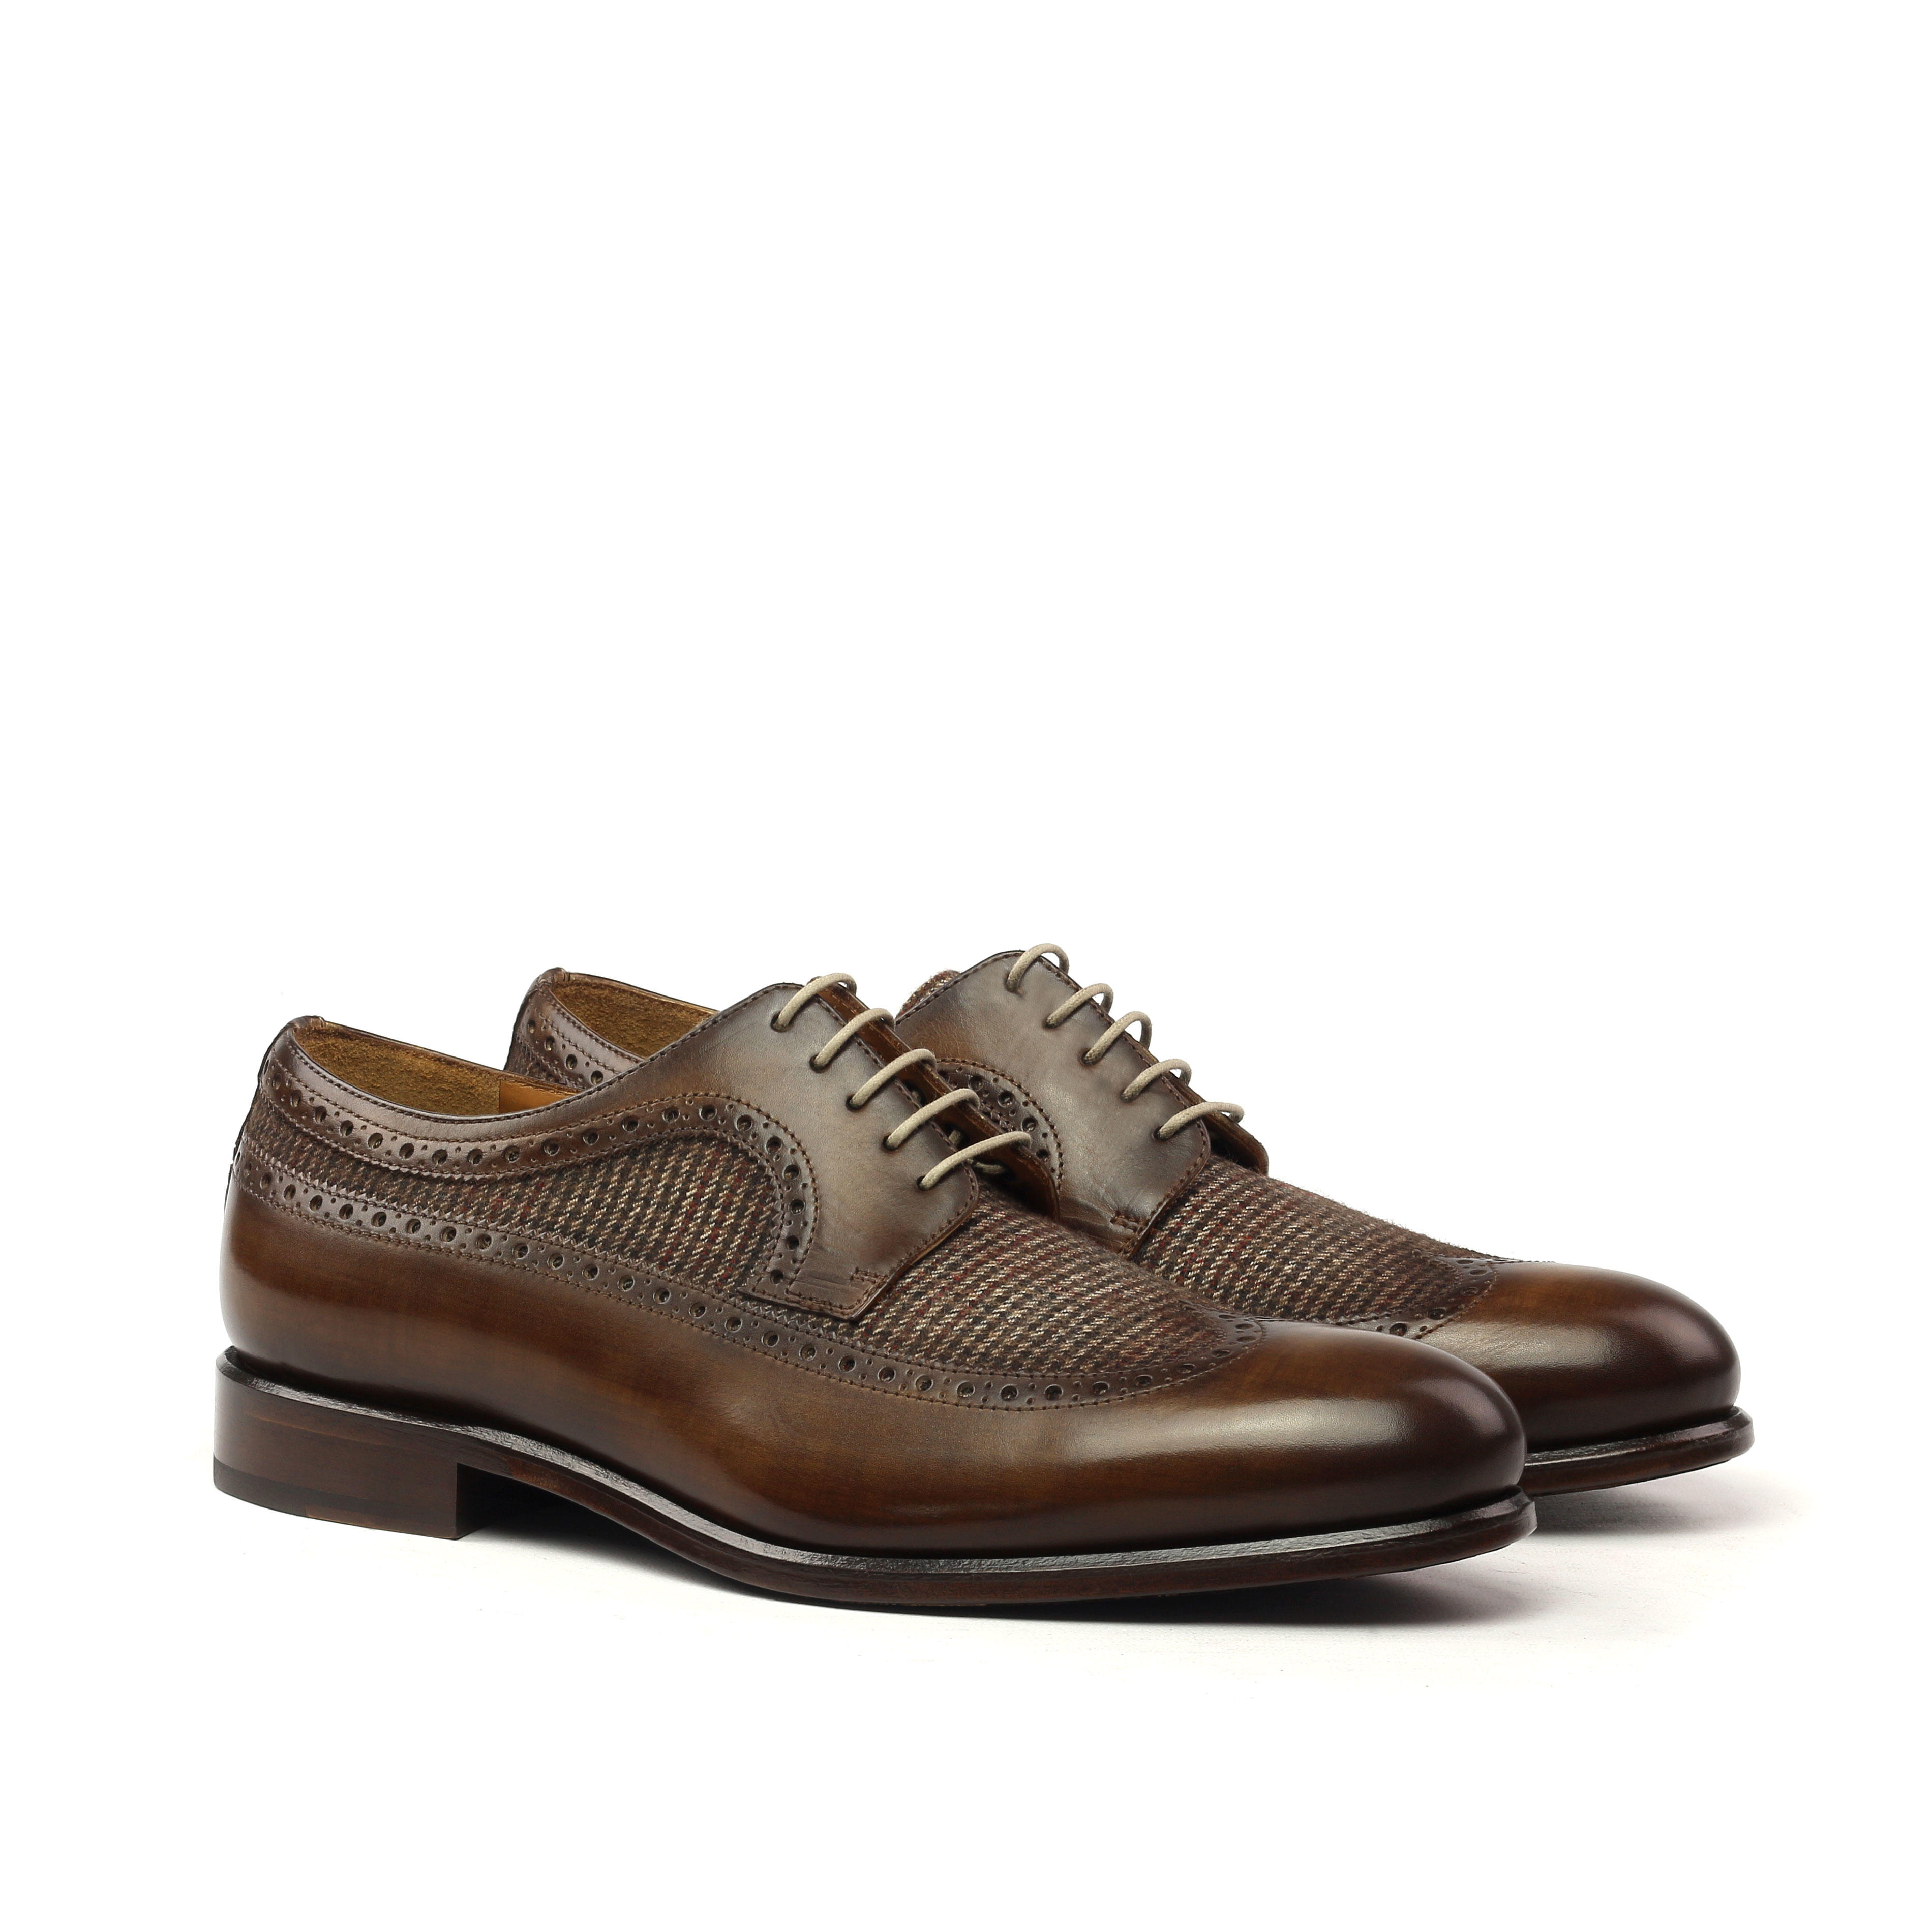 Manor of London 'The Blucher' Brown Patina Calfskin & Tweed Shoe Luxury Lace Up Custom Initials Front Side View